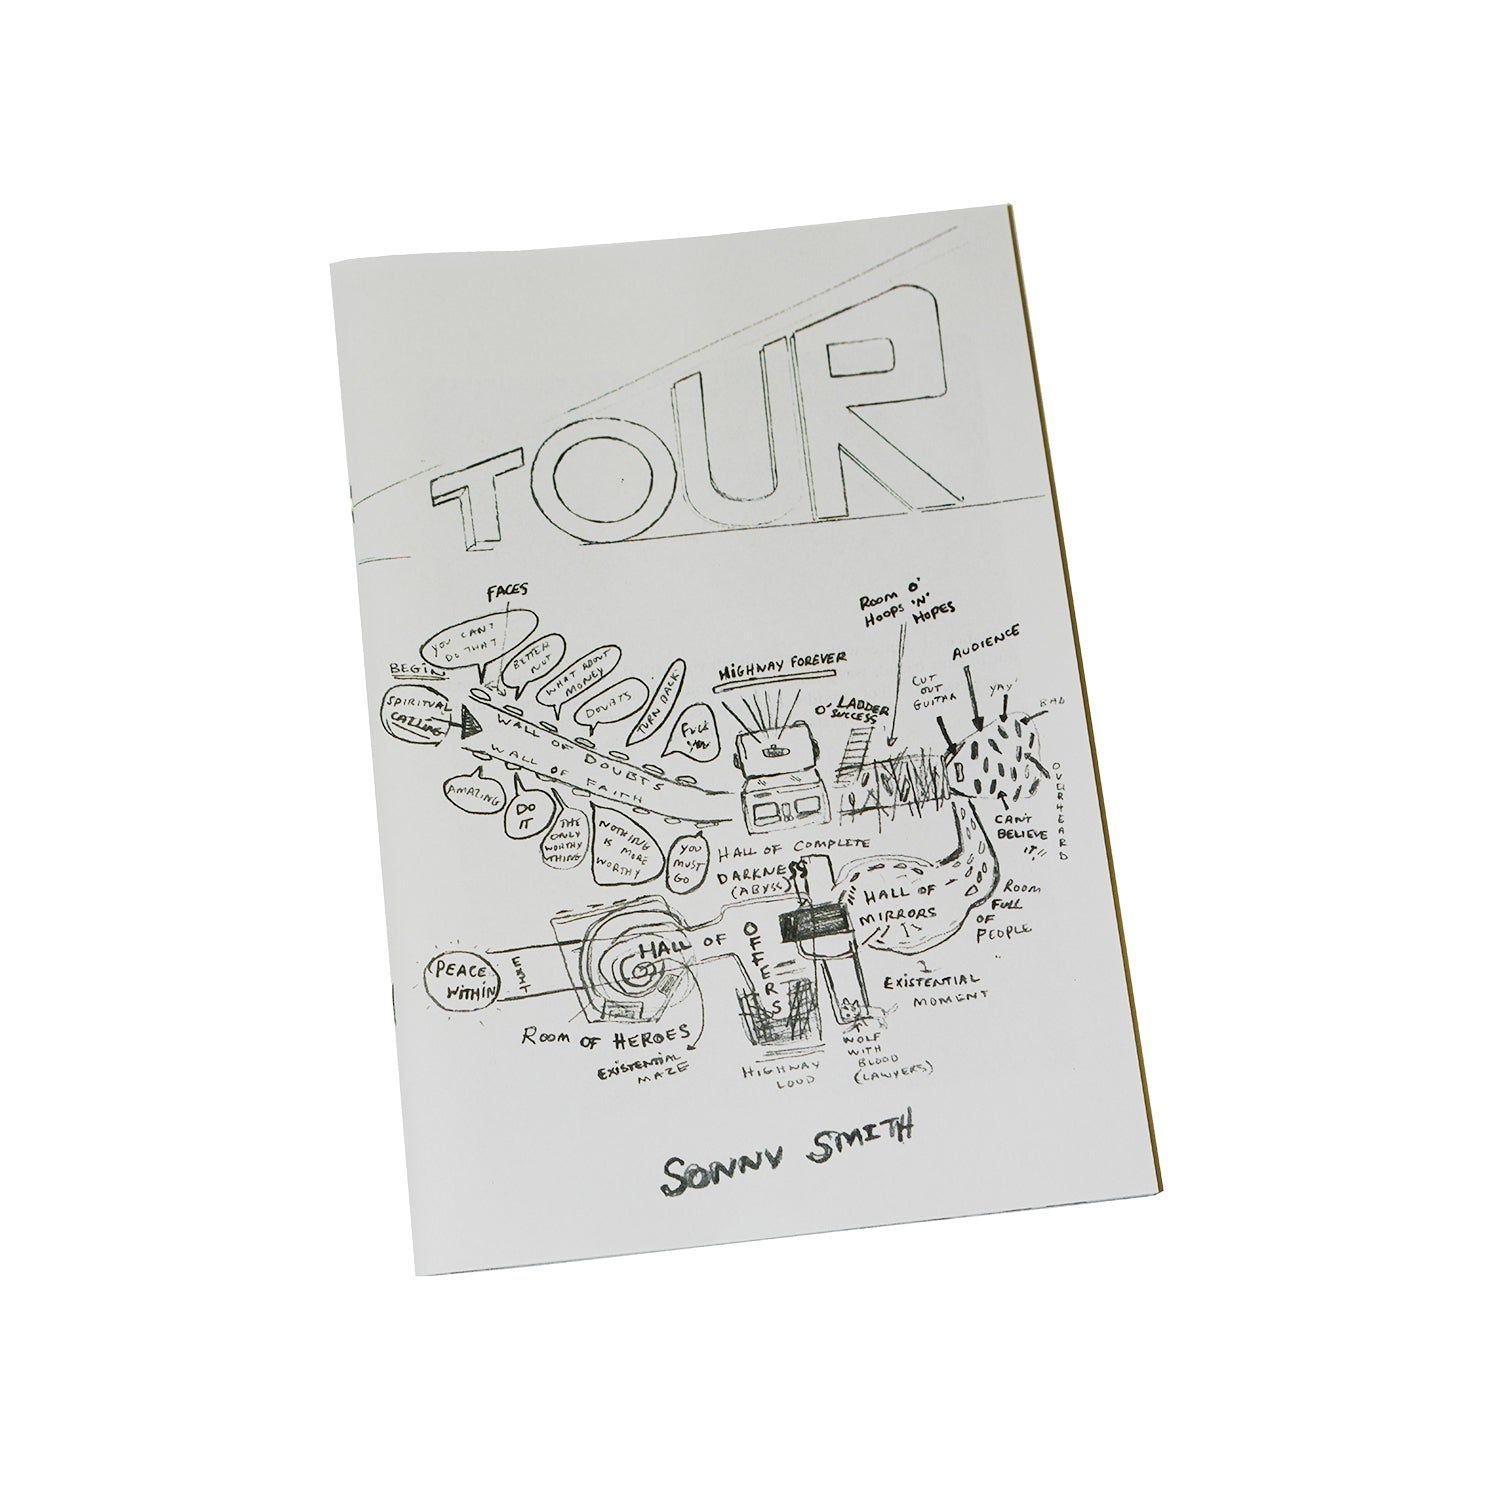 Sonny Smith and friends - TOUR ZINE